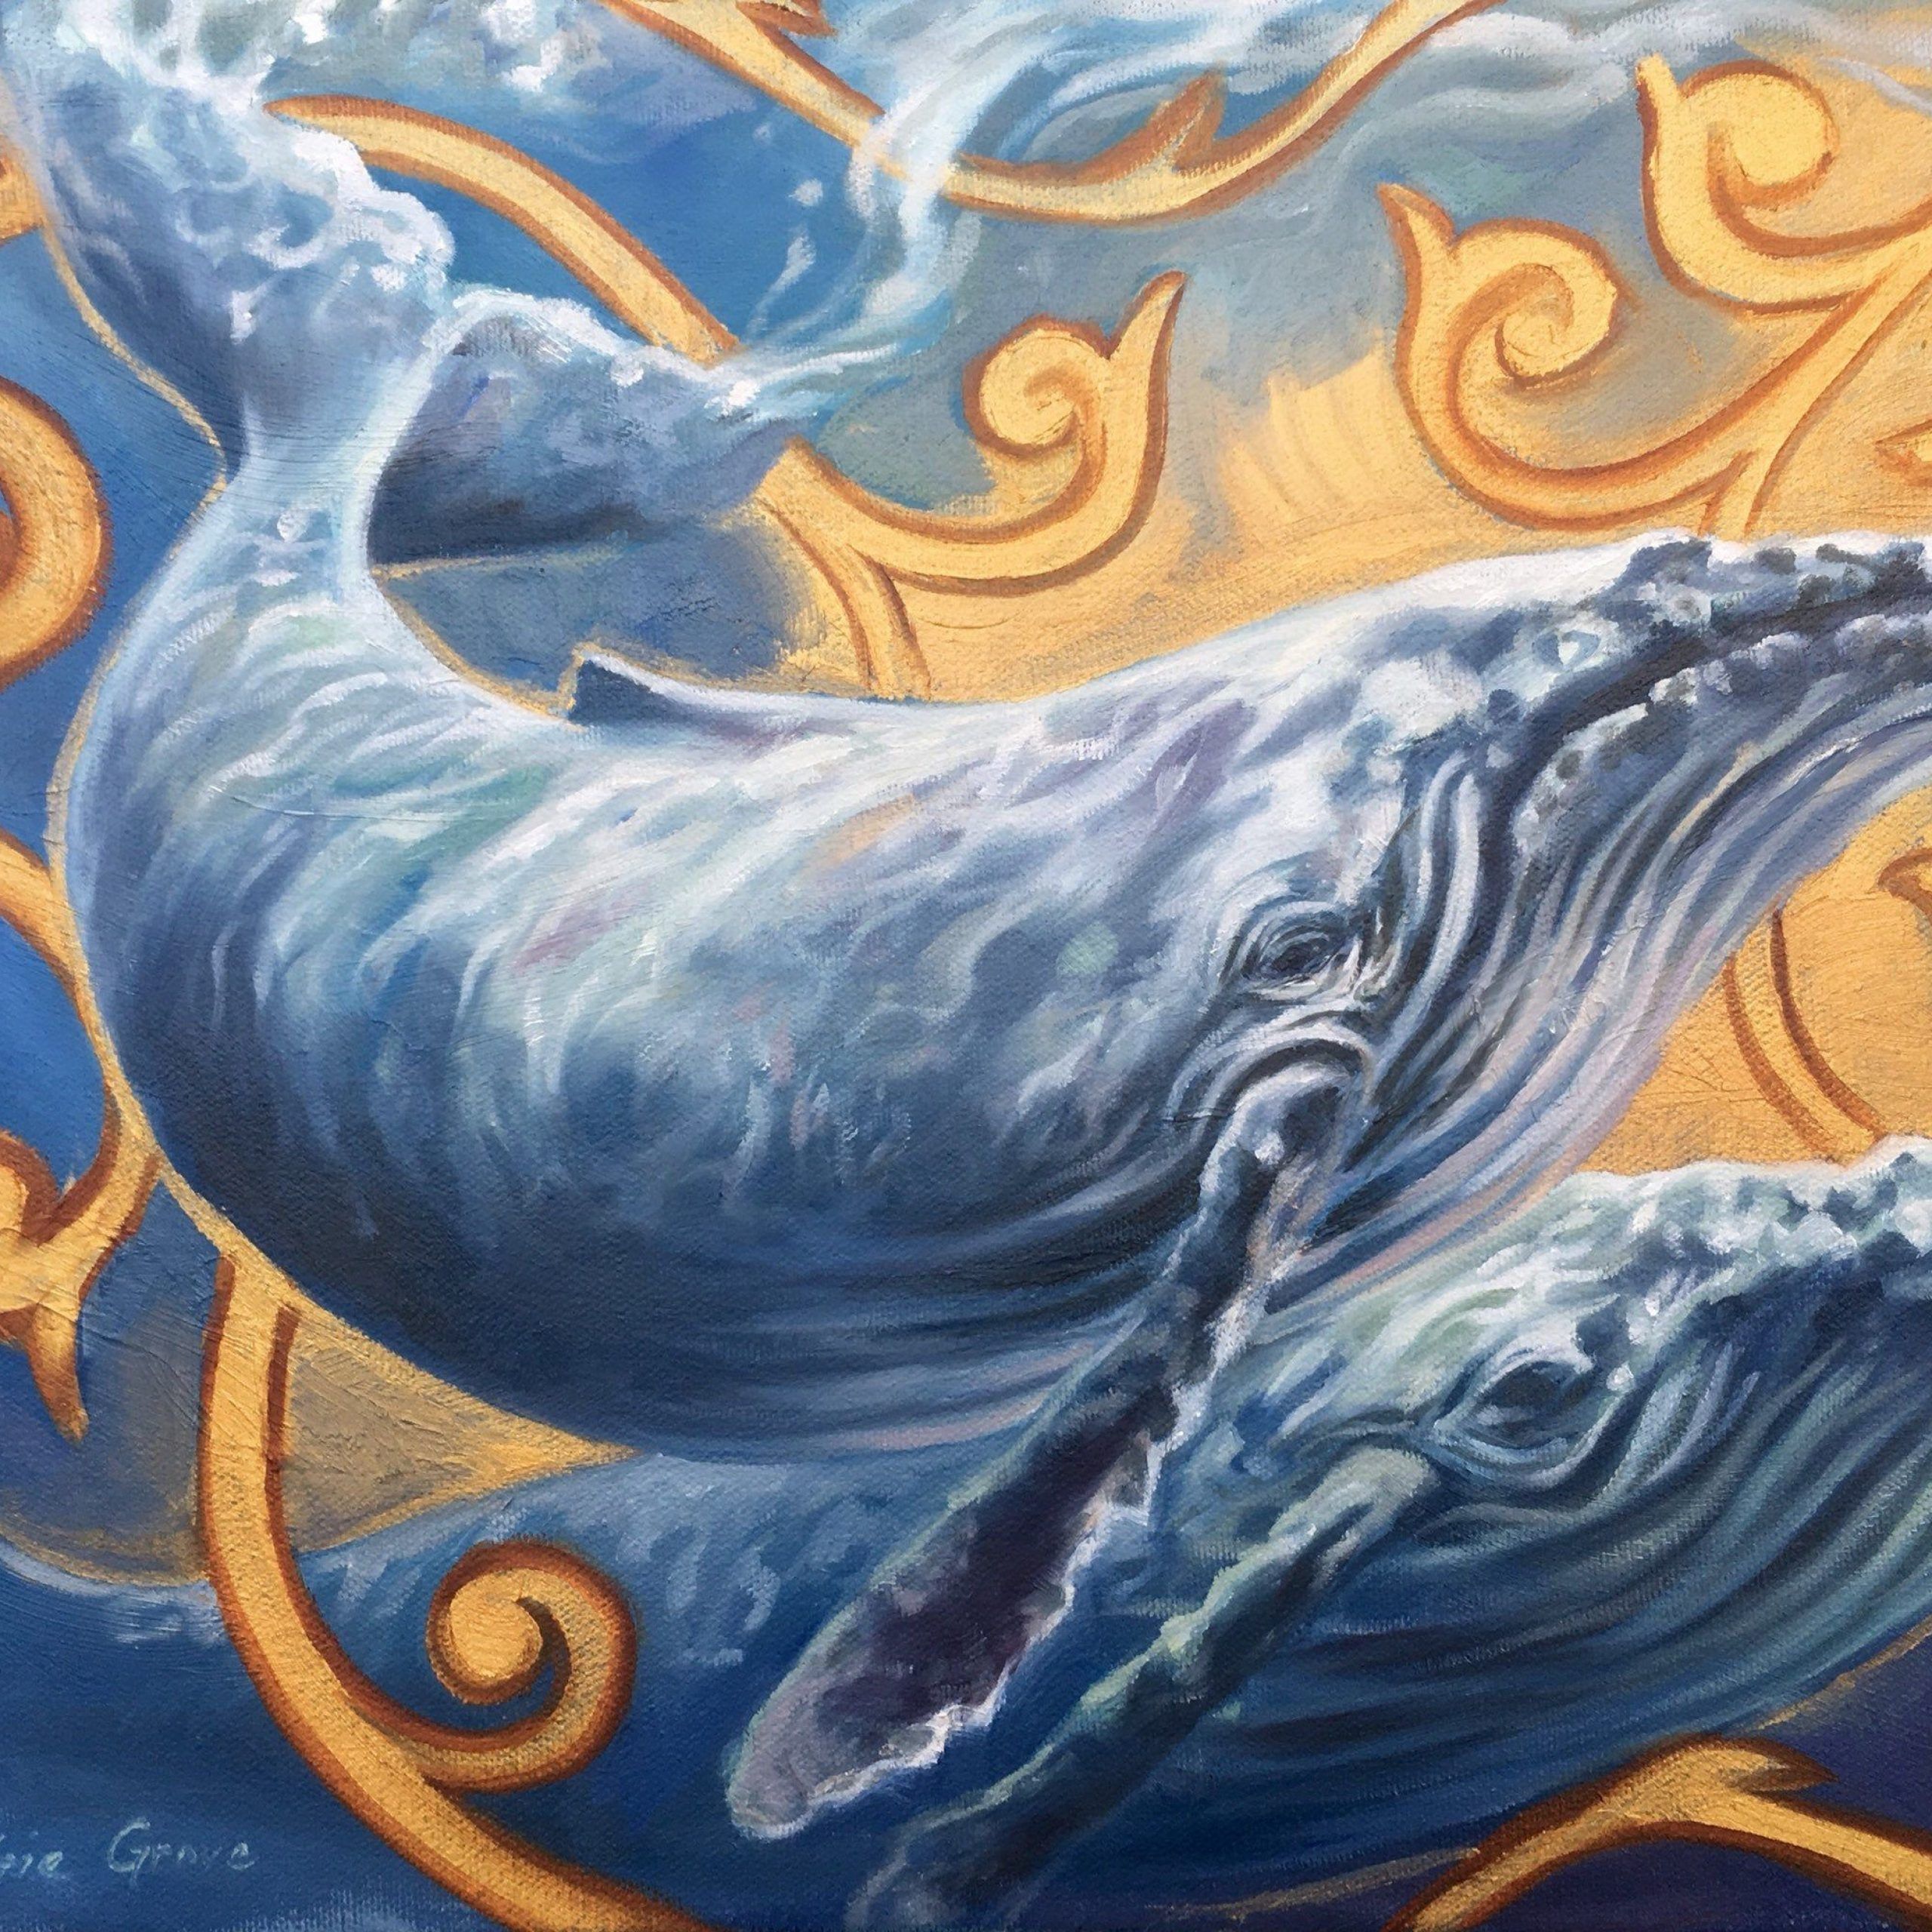 Humpback Whale Painting Golden Creatures: Gentle Company | Etsy | Art Regarding Humpback Whale Wall Art (View 9 of 15)